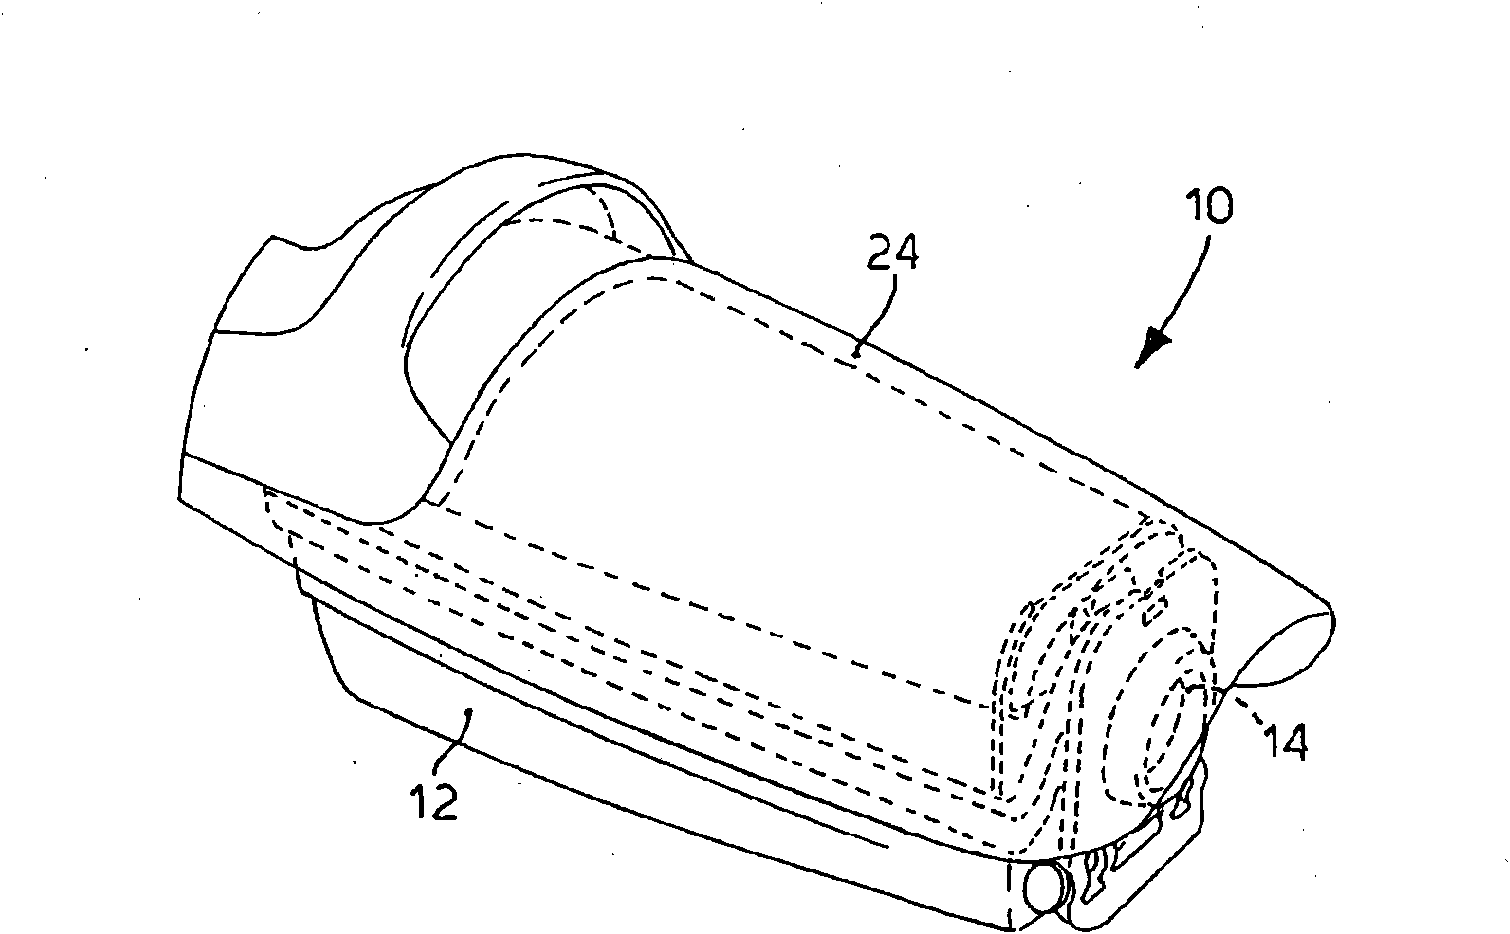 Device for the collection of dirt in a suction apparatus